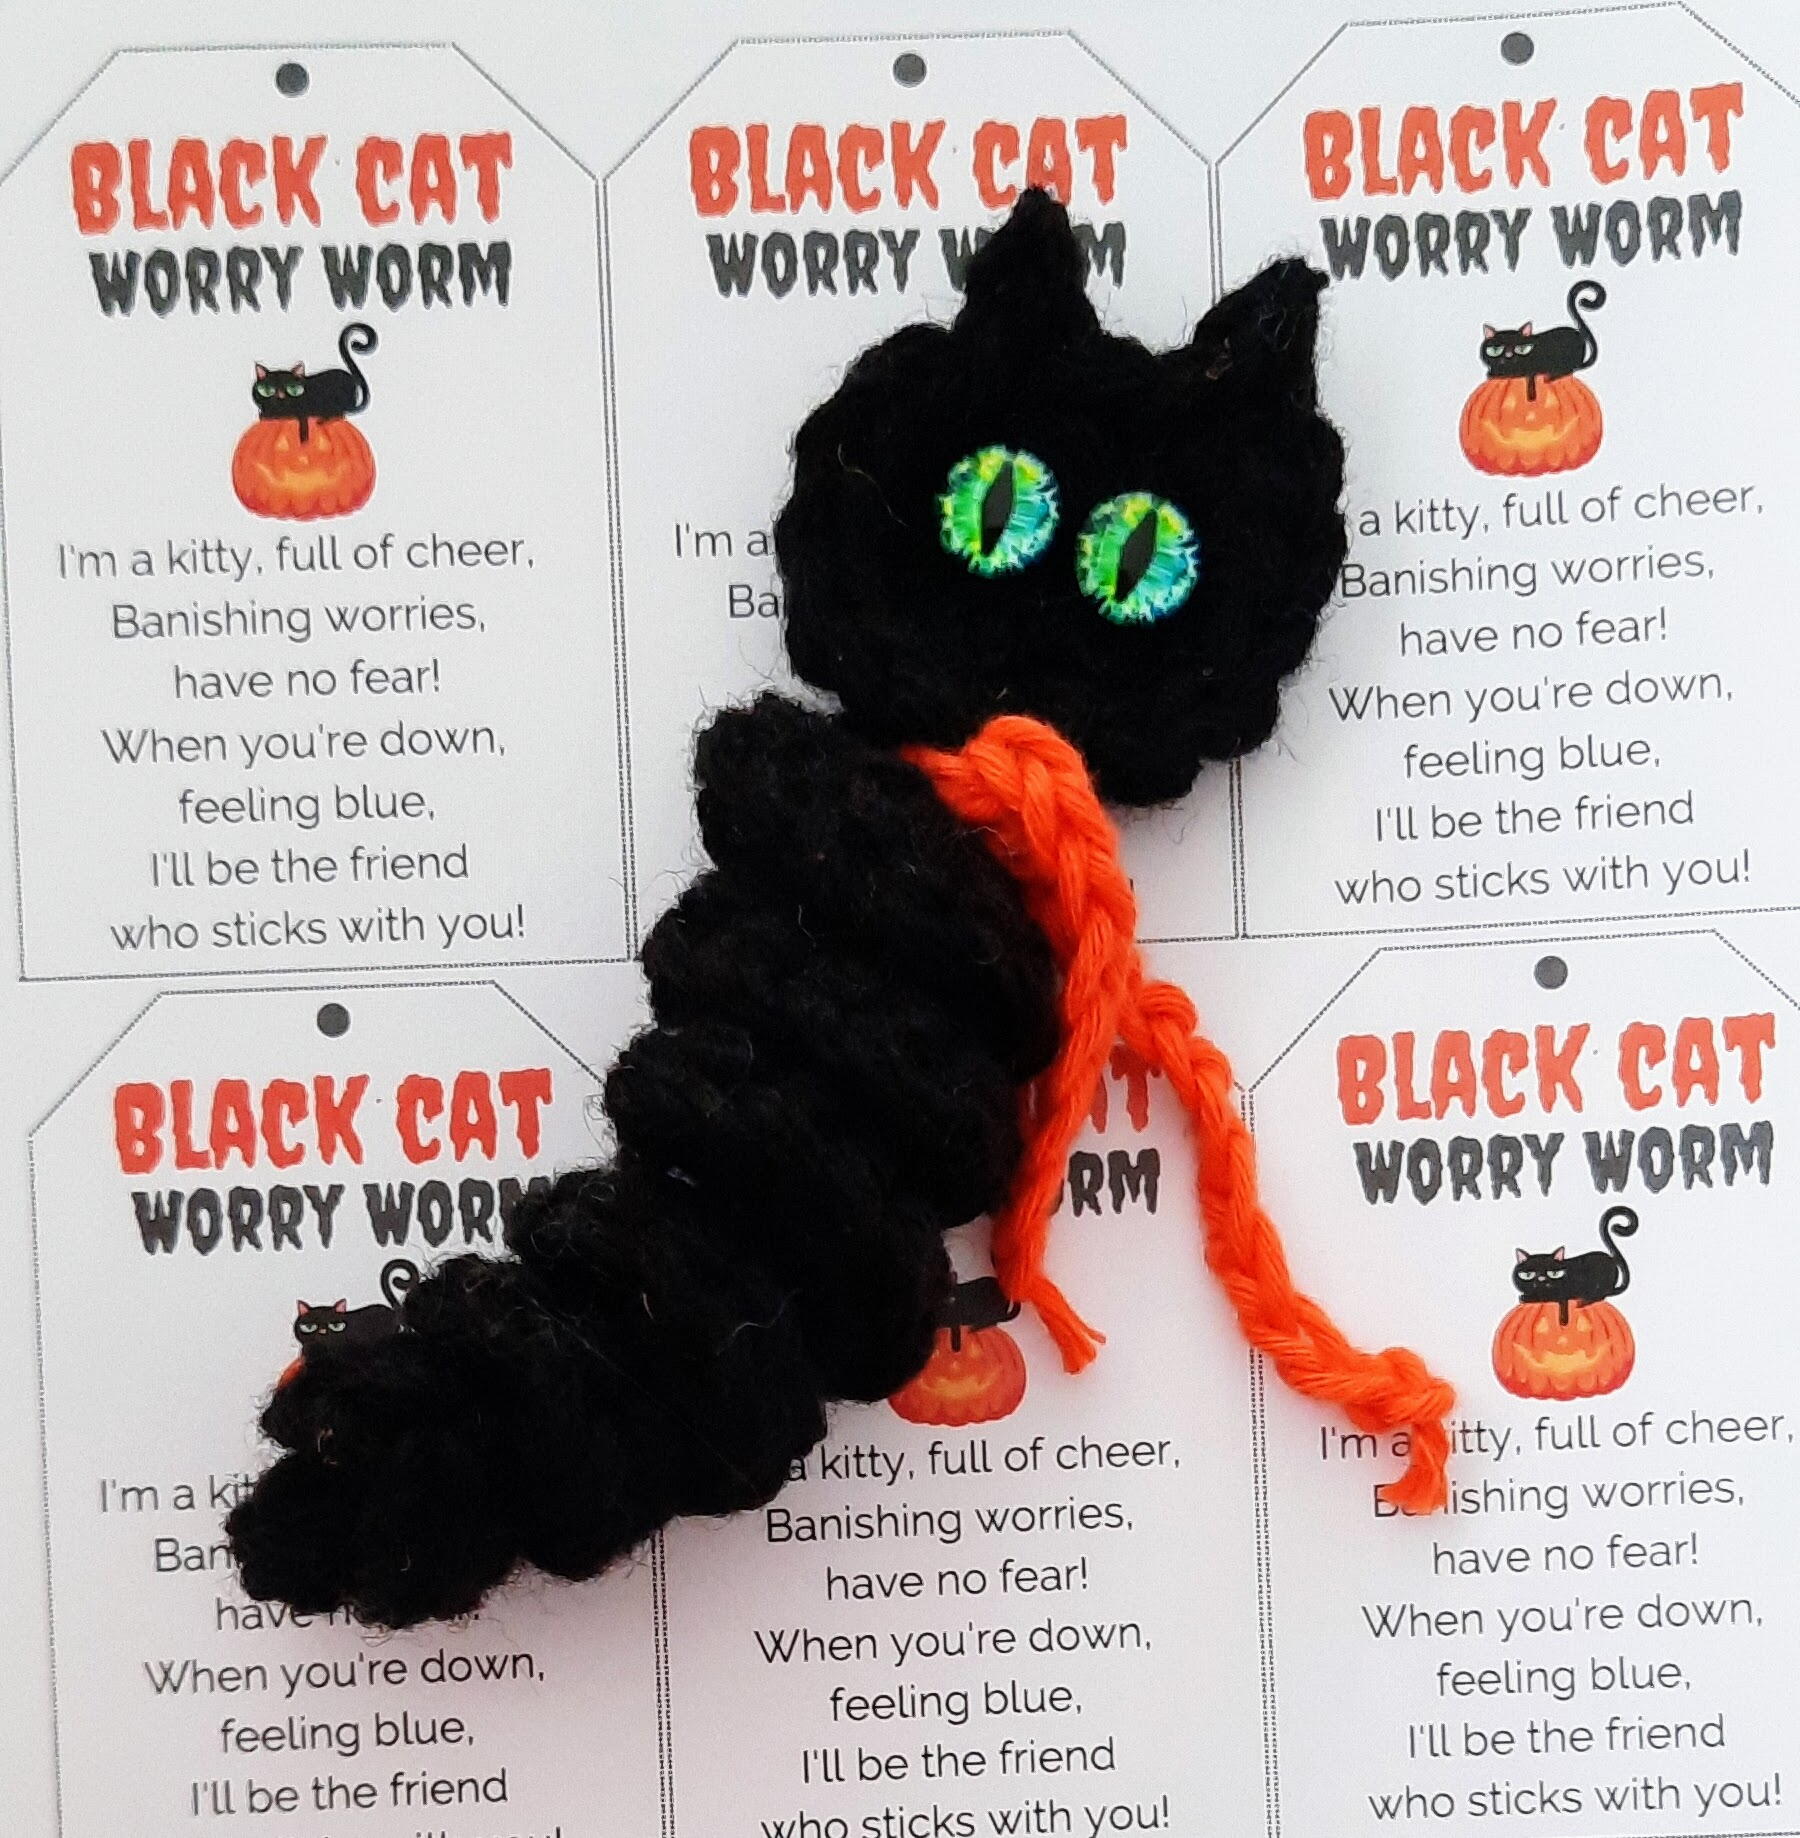 8 Free Easy Worry Worm Crochet Patterns - Crafting Happiness